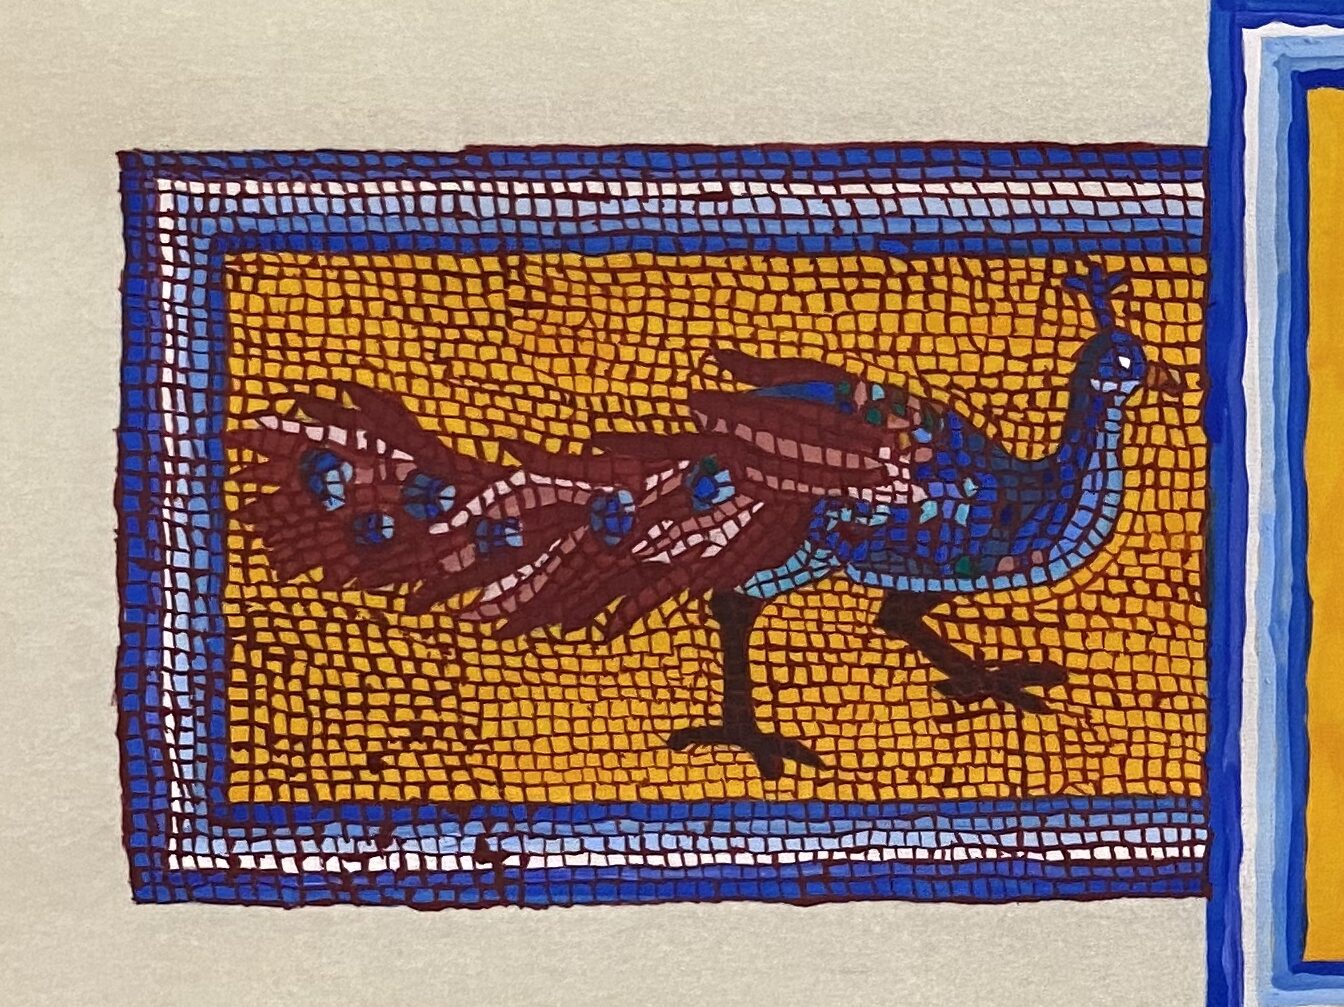 The same document. Detail of left peacock with grouting complete. The peacock has a kind of grid laid over the image to mimic mosaic tiling